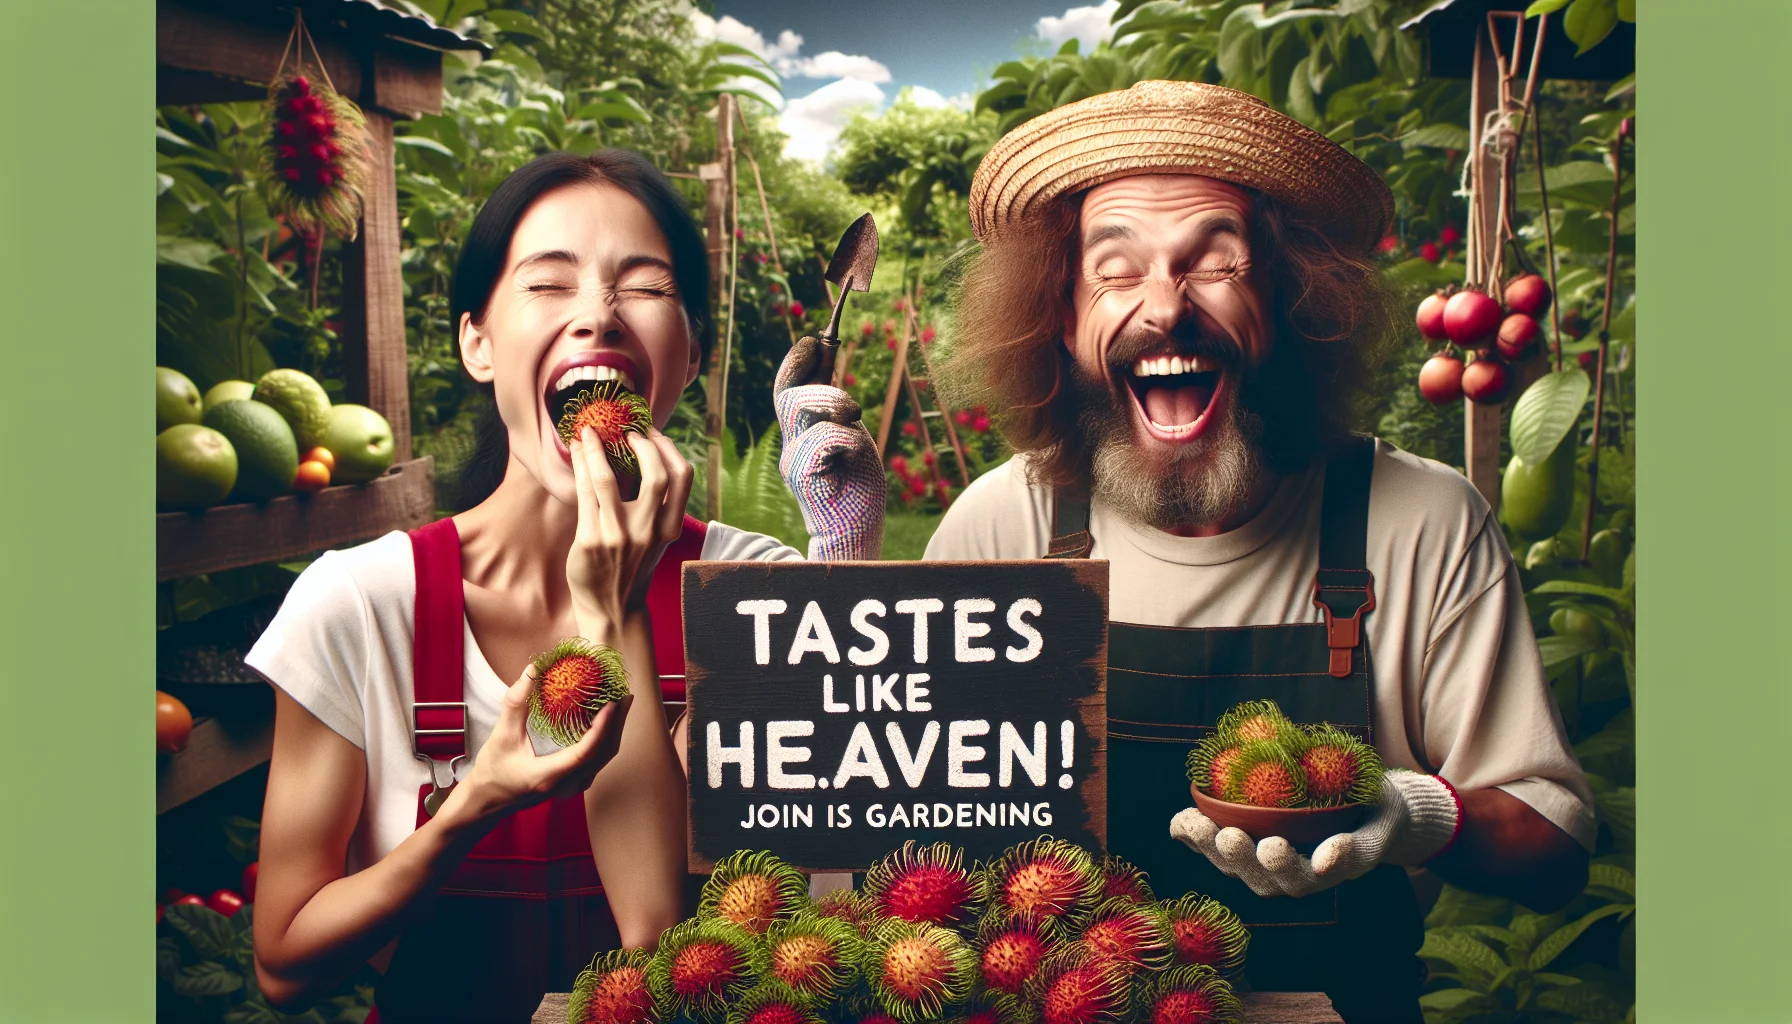 Create a humorous and enticing image that embodies the flavor of a rambutan. Picture this: A lively South Asian woman and an enthusiastic Caucasian man both in gardening clothes in an abundant garden. The woman holds a ripe, peeled rambutan near her mouth, eyes closed in anticipation. The man is laughing and holding a rambutan-themed sign that says, 'Tastes Like Heaven! Join is in Gardening'. Their faces express the joy of gardening and the deliciousness of the fruit. The garden behind them is filled with various other fruits and vegetables.